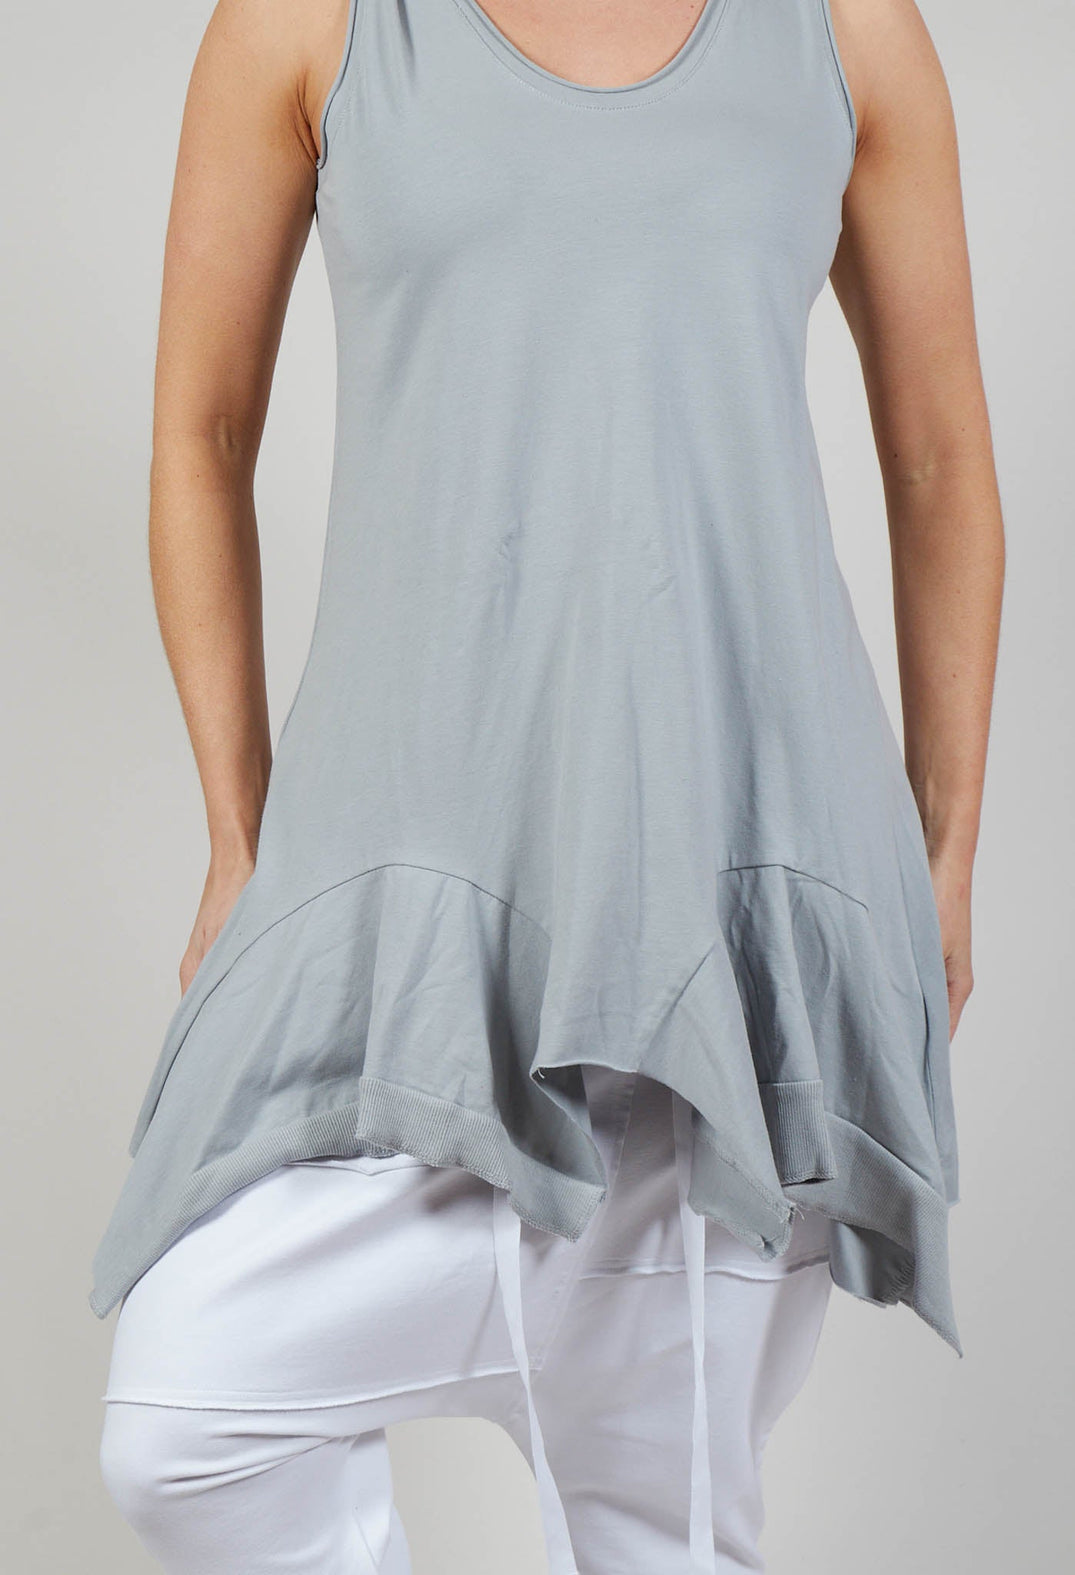 Turn Over Top in Light Grey